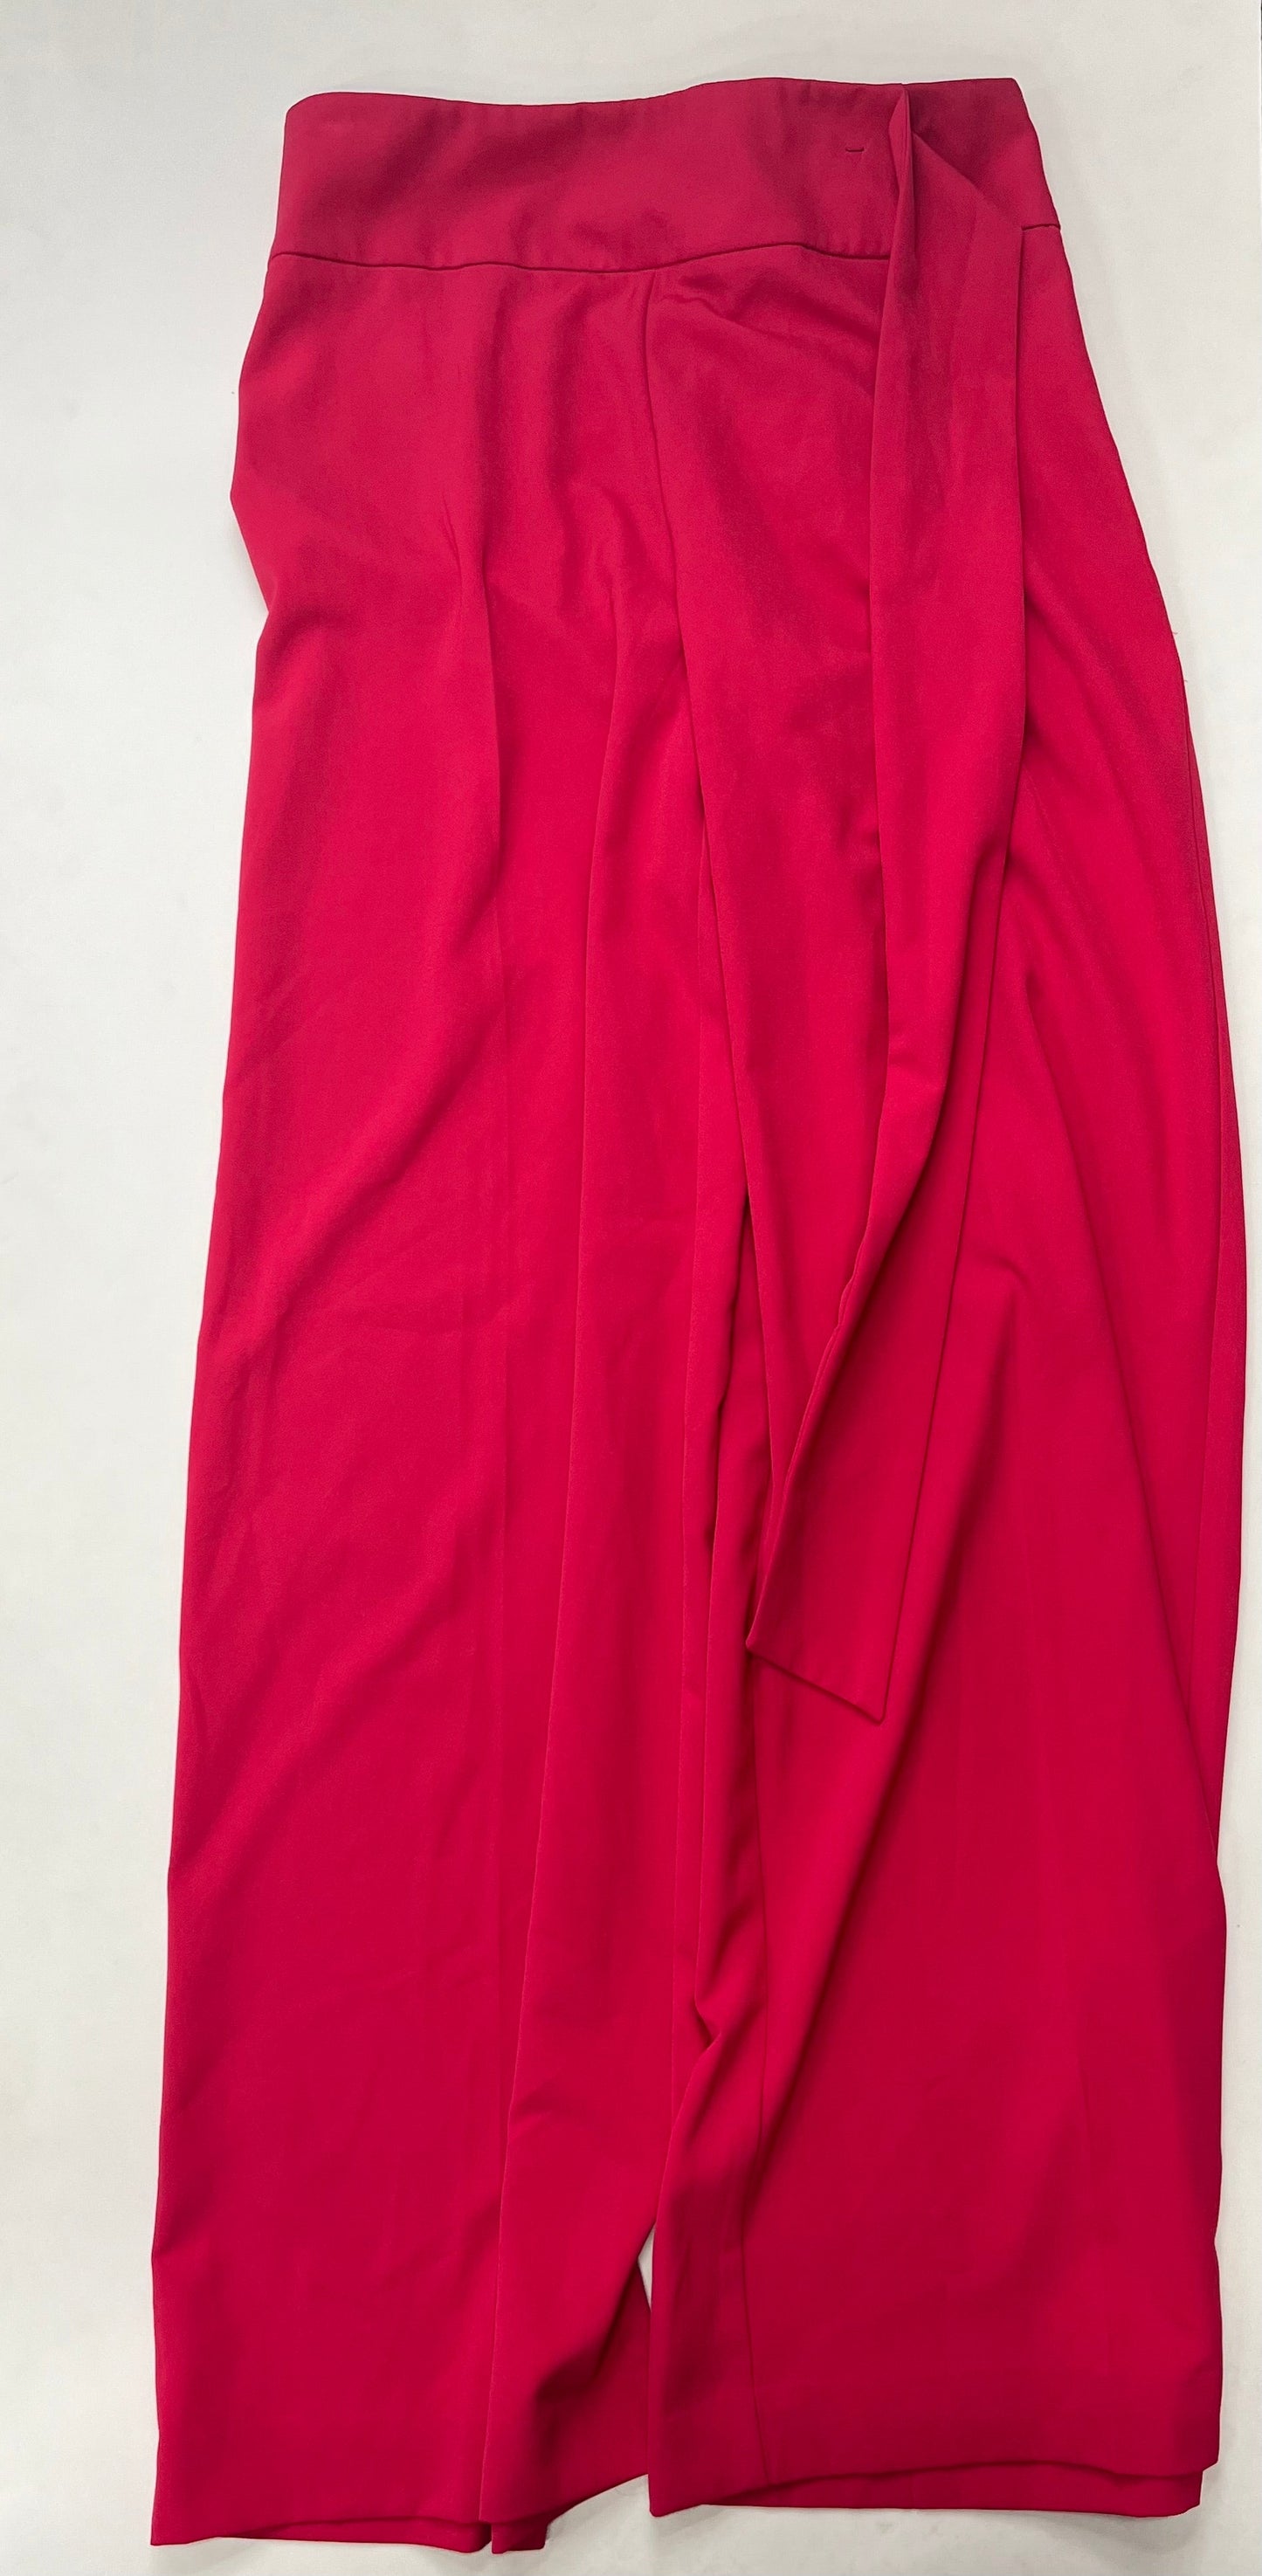 Hot Pink Pants Palazzo New York And Co, Size 4